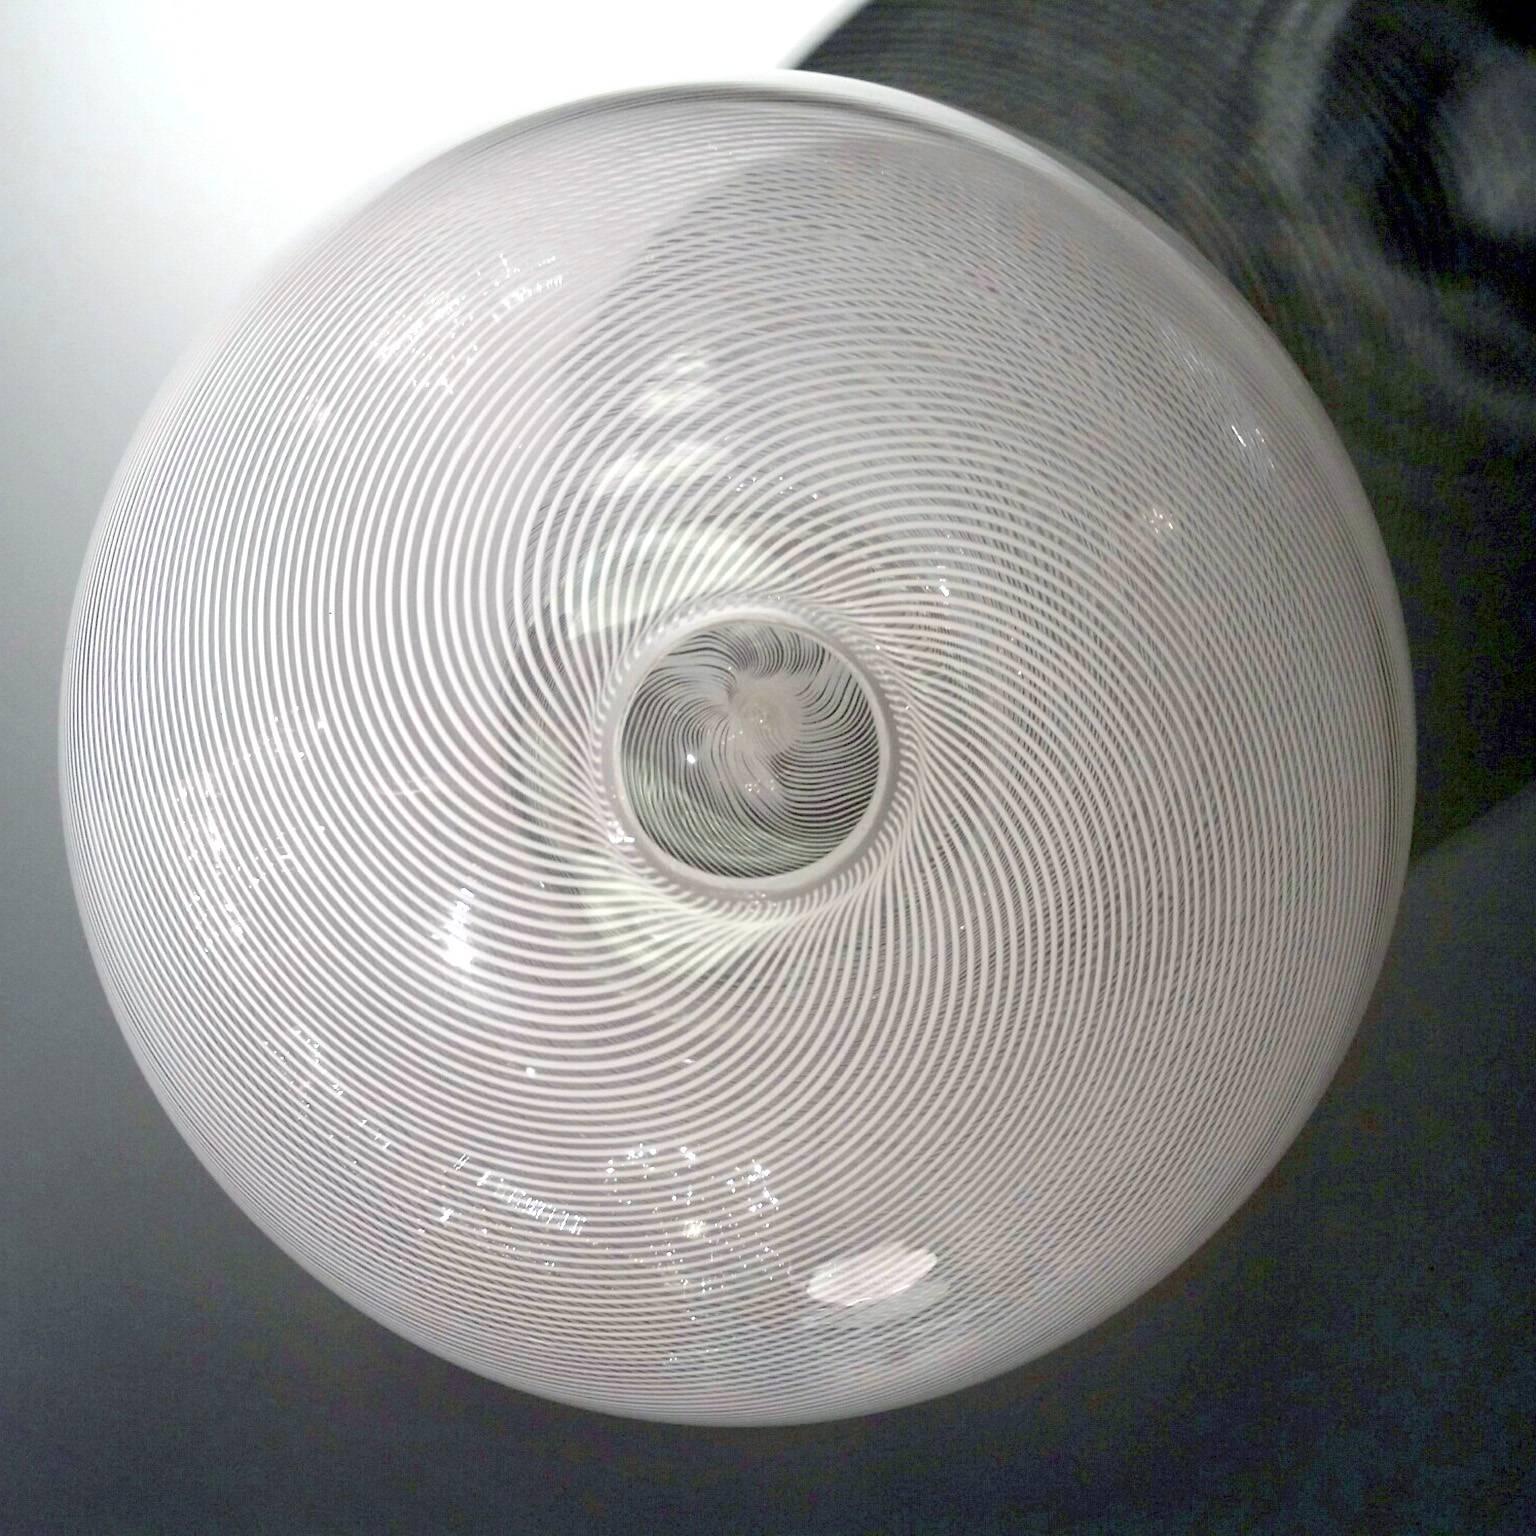 Re-edition of an handmade Murano blow-glass of a white "filigree" oval shaped vase designed by Carlo Scarpa in 1940s for Venini.
Numbered Edition.
Signature: Venini Carlo Scarpa 2013 / 4.